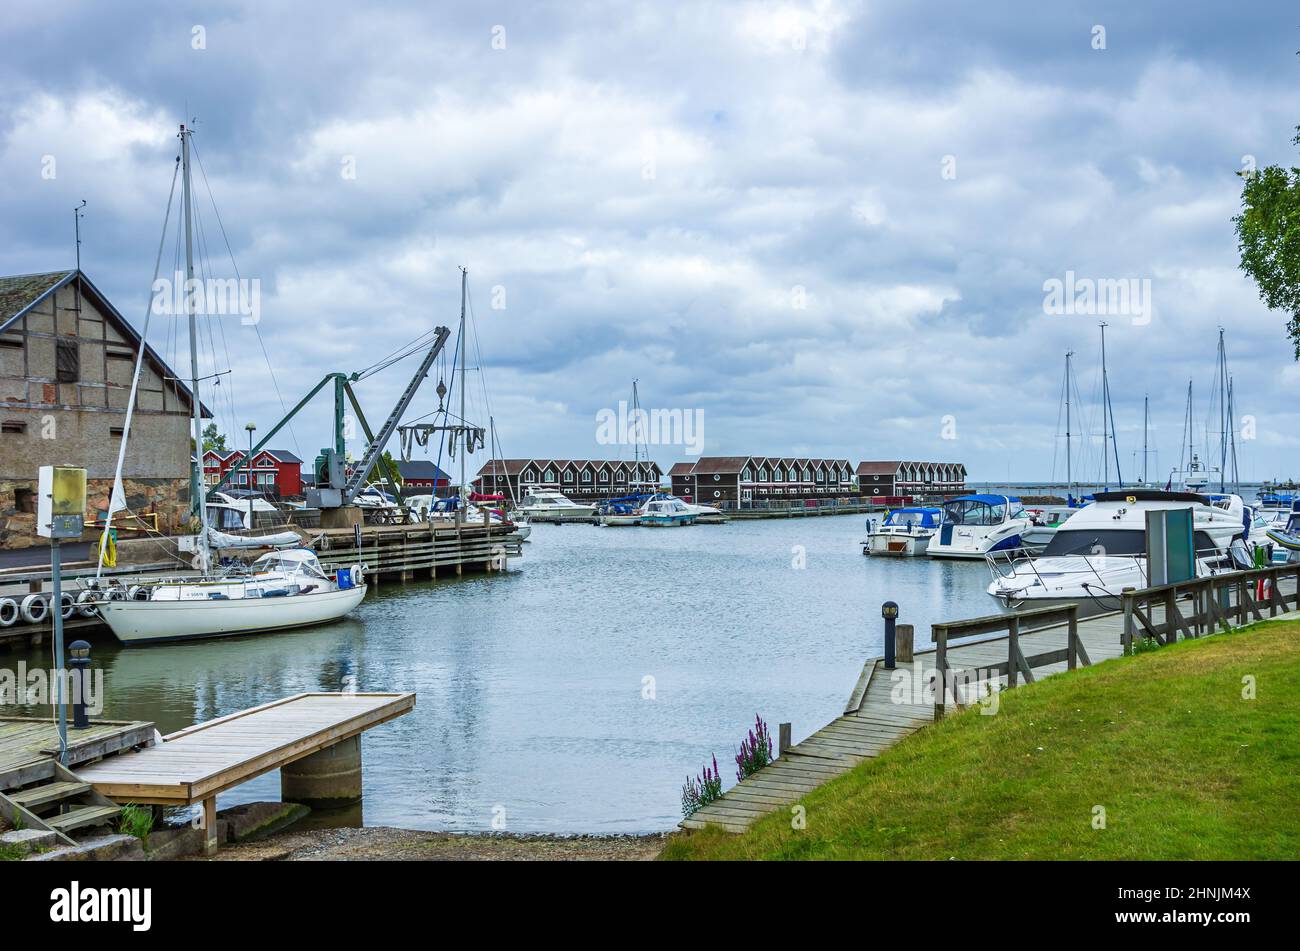 Mellerud, Dalsland, Sweden - August 9, 2016: Picturesque view of the small harbour of Sunnana (Sunnana hamn) at Lake Vanern. Stock Photo